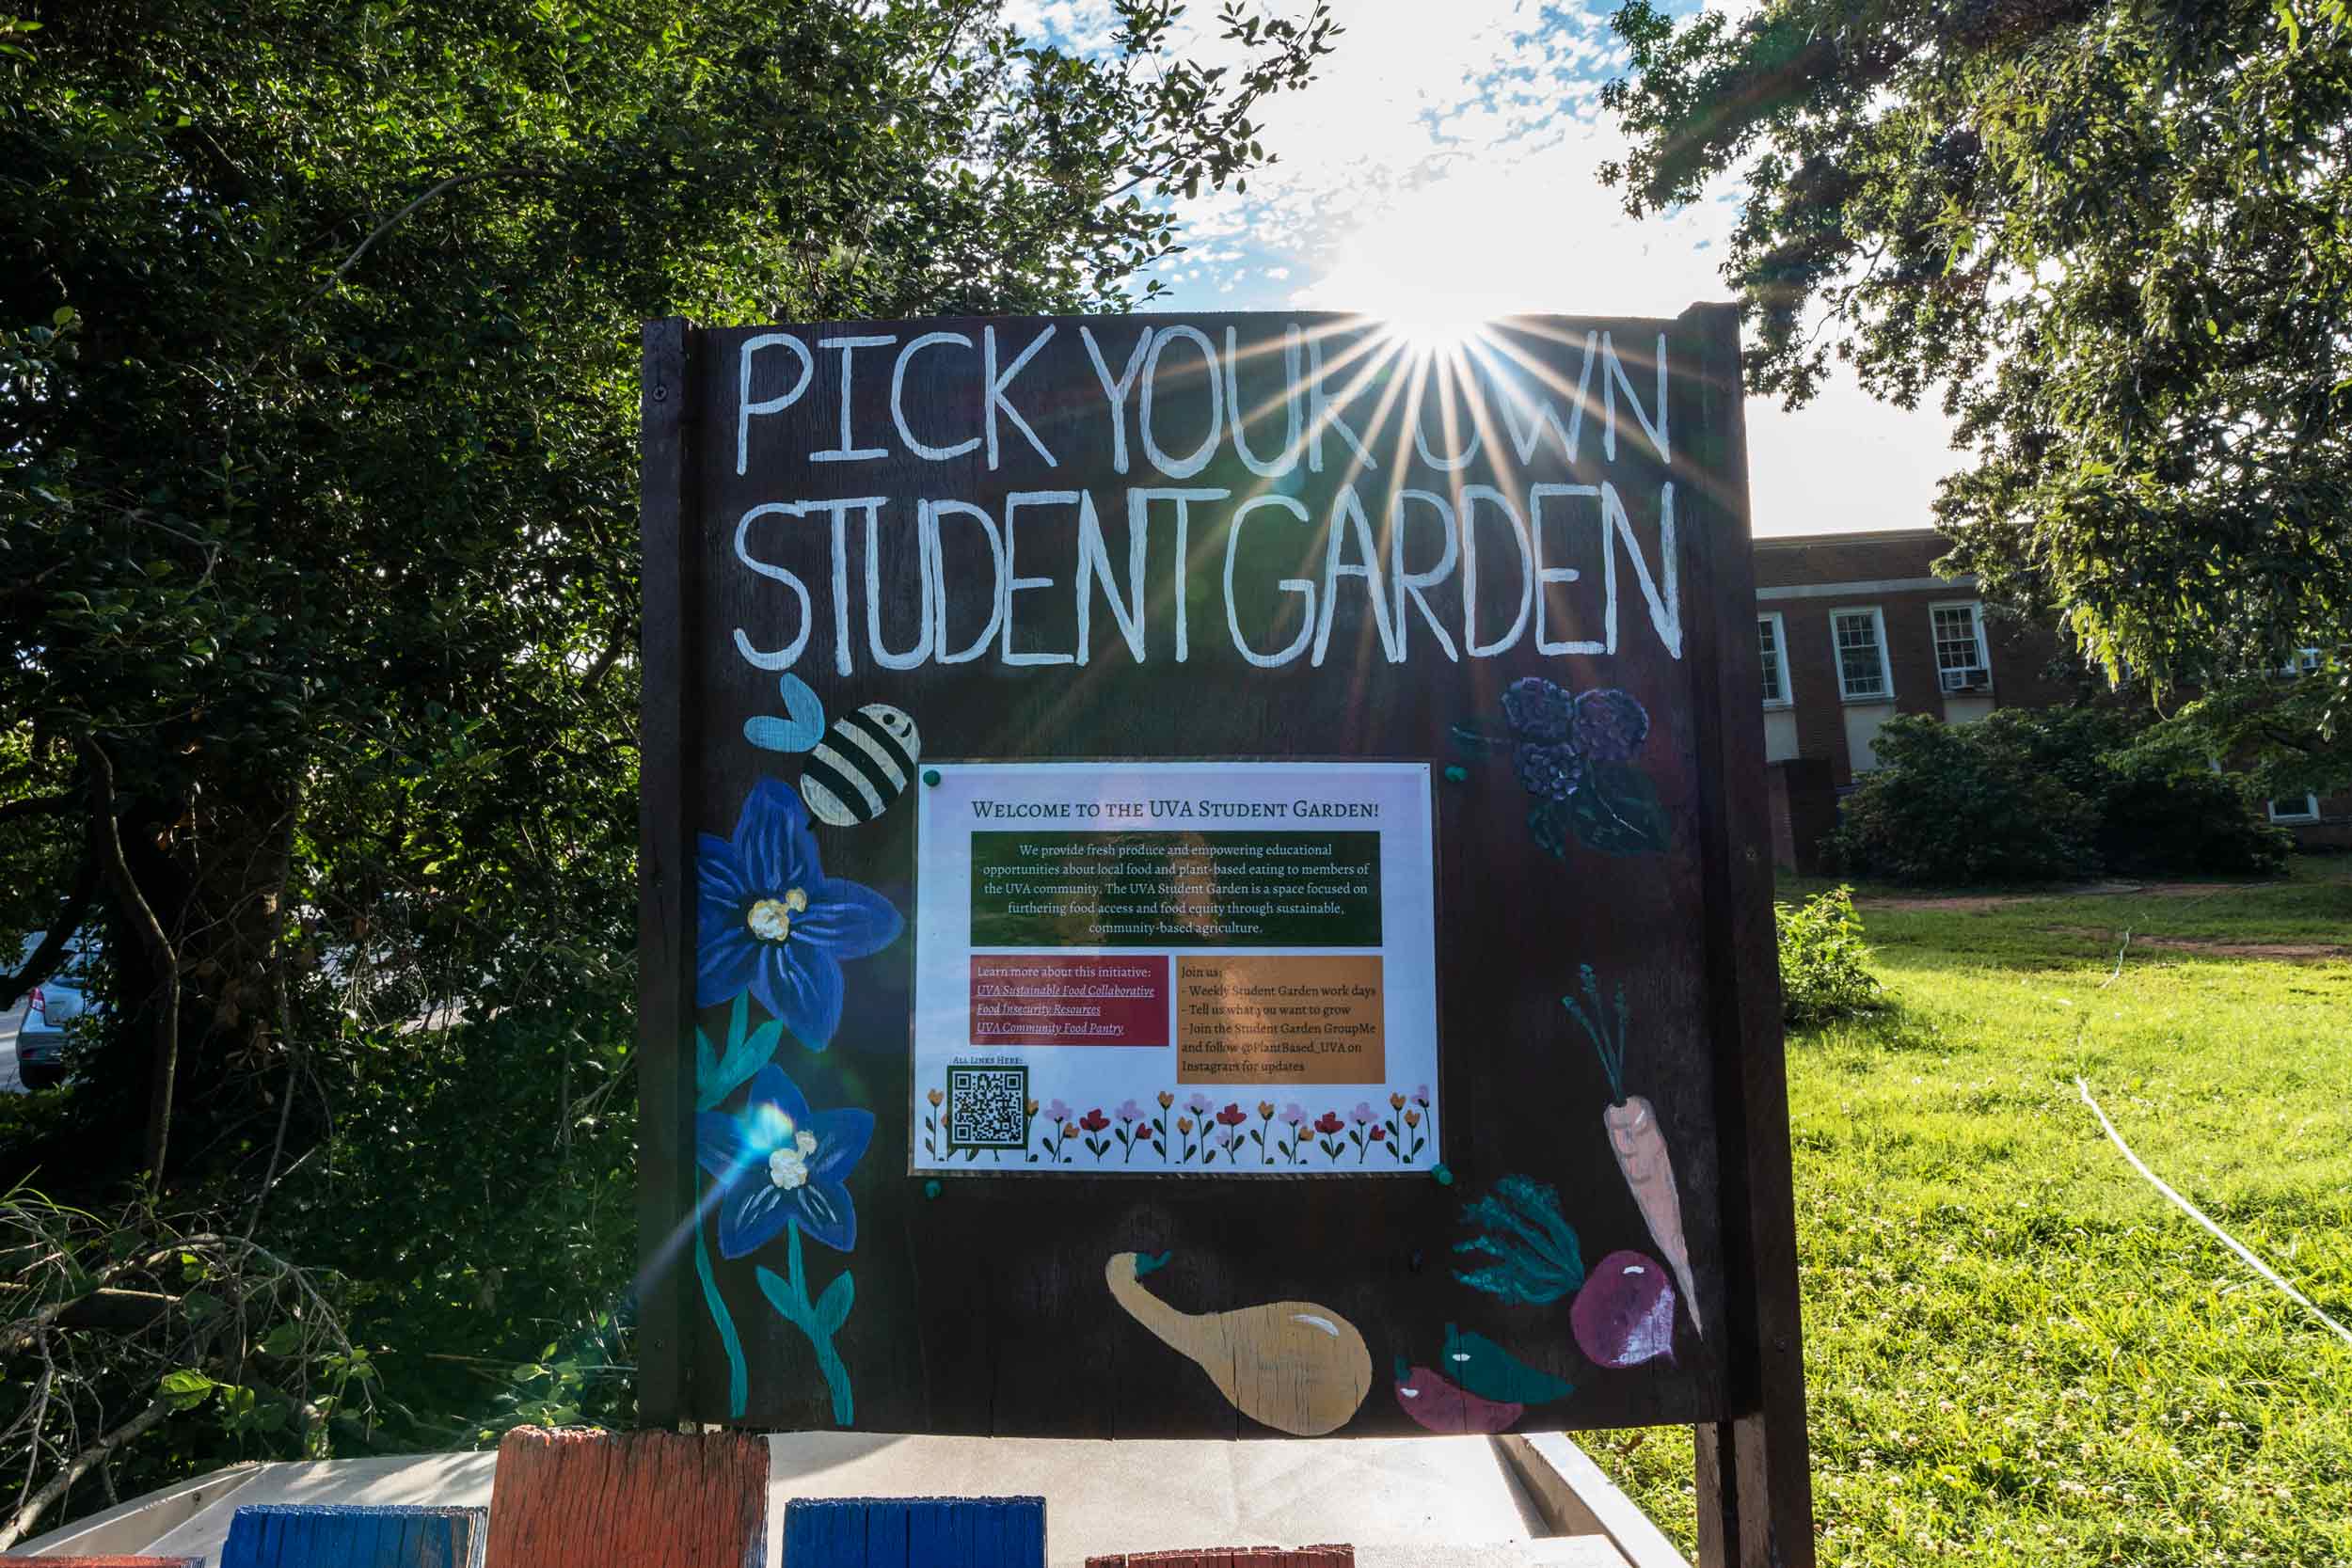 A sign at the garden says providing a gardening education is as important as providing fresh food.